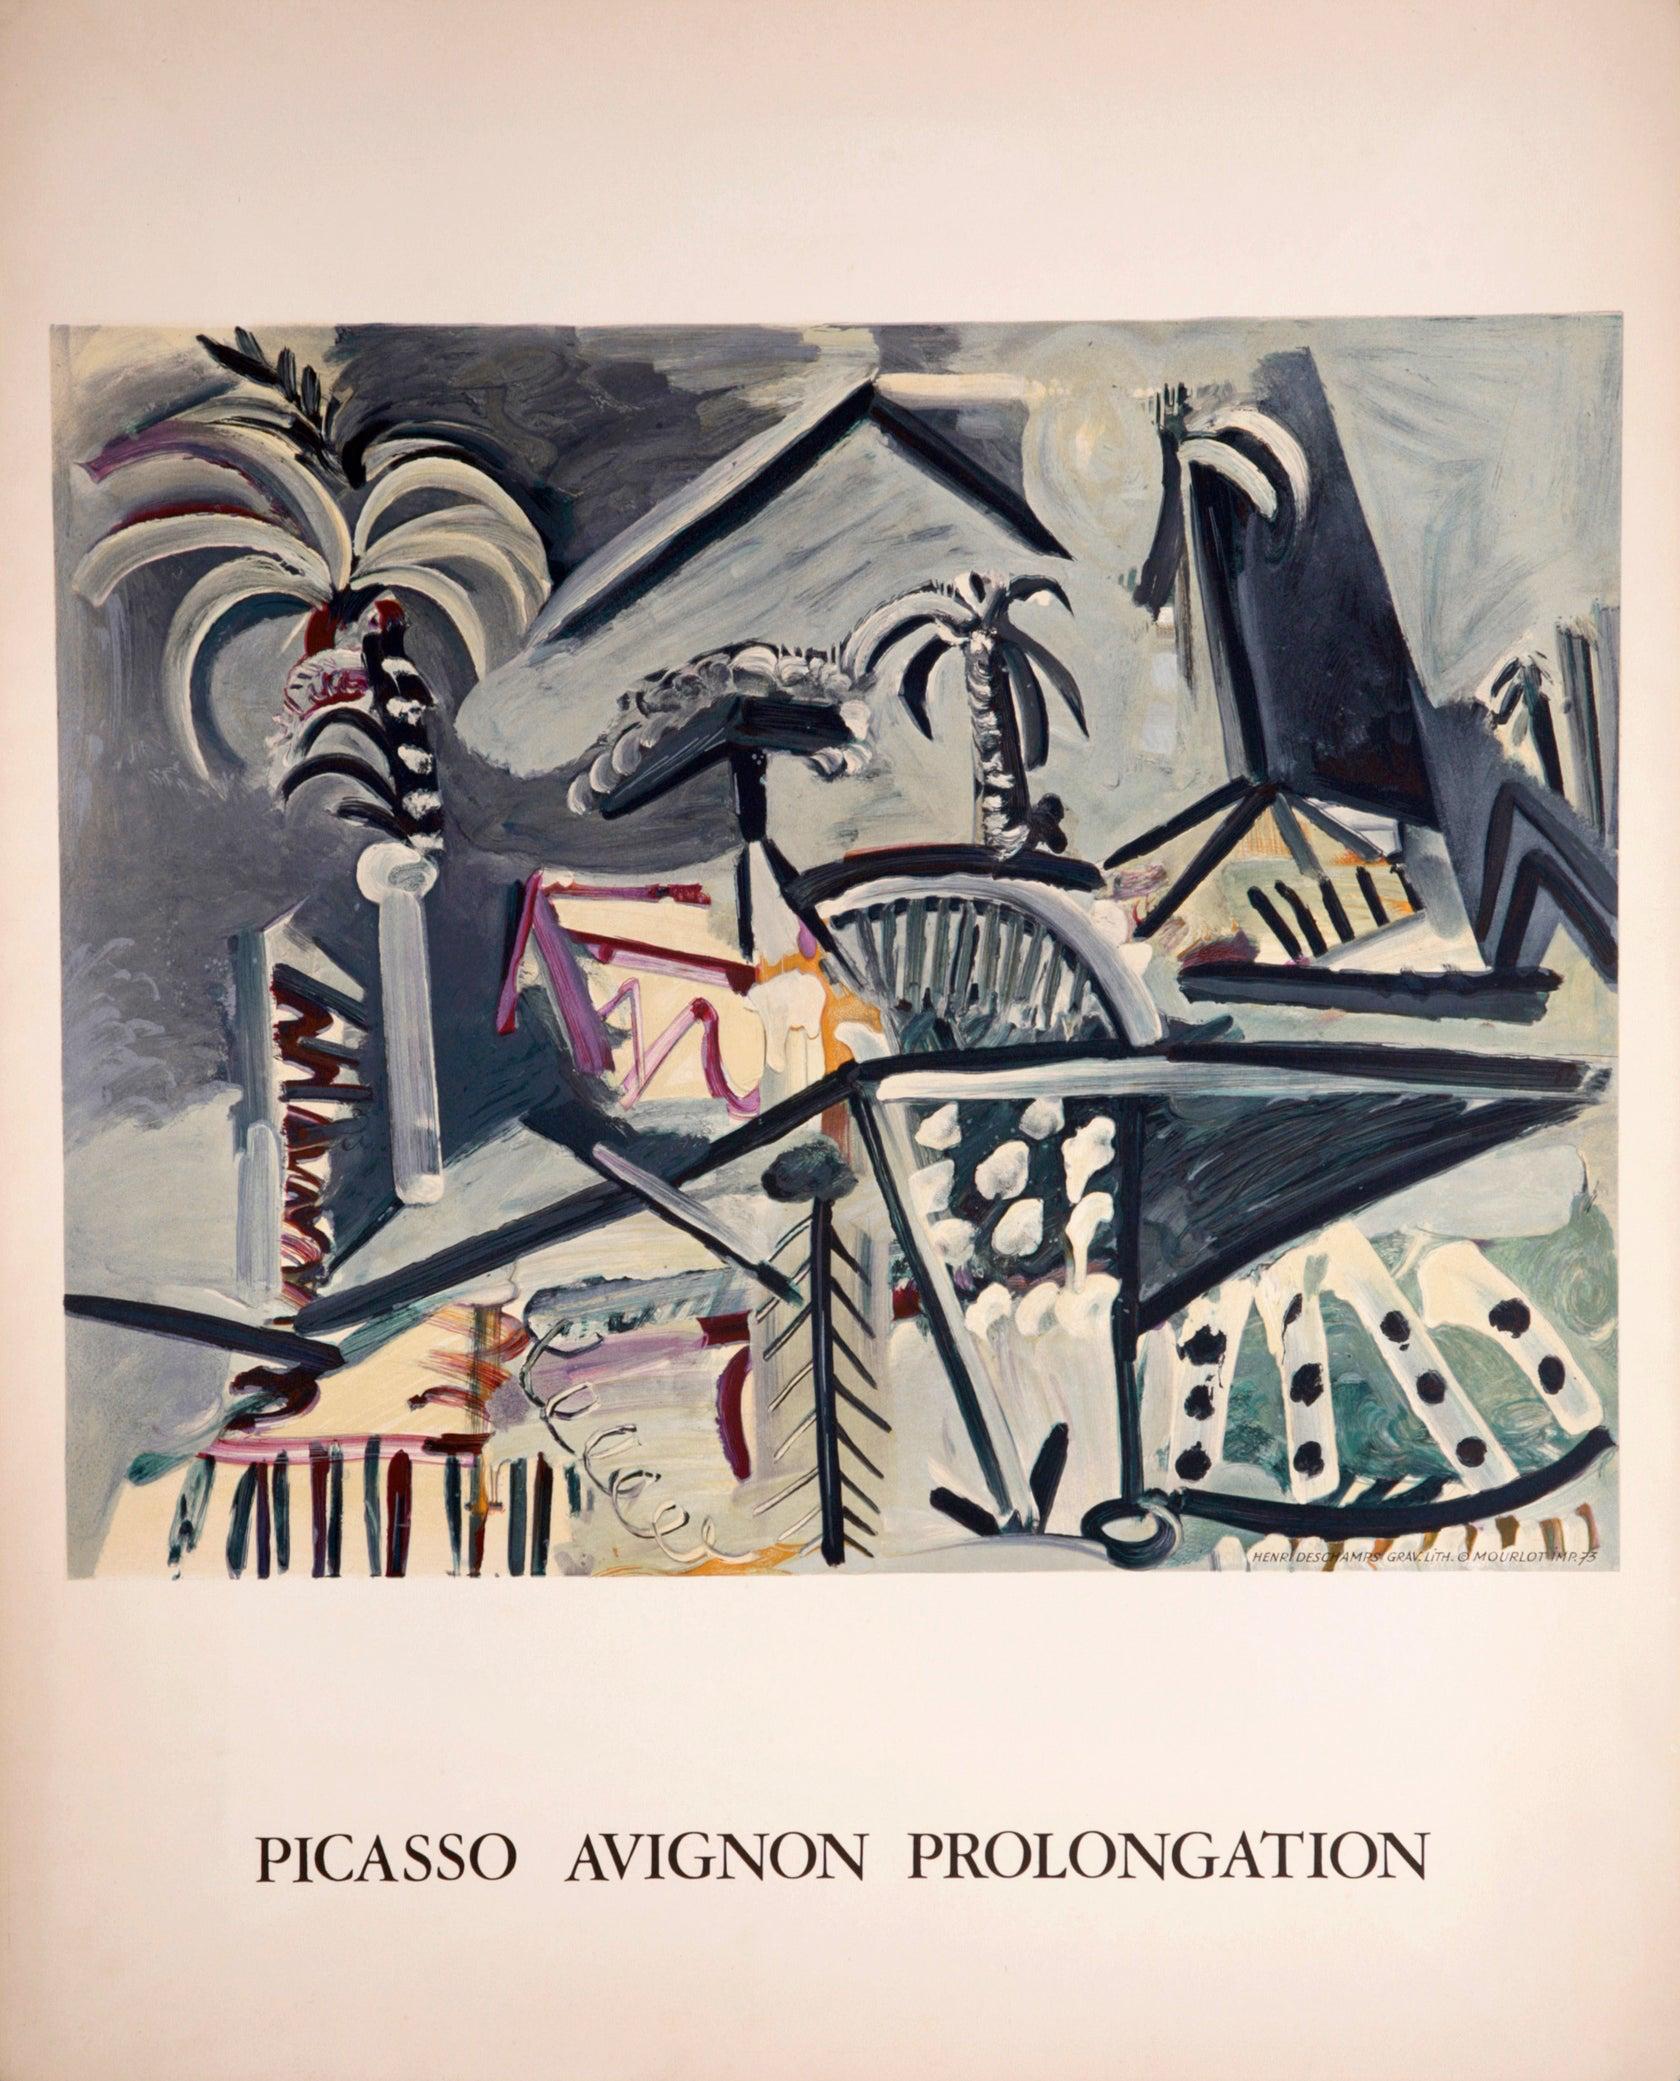 Picasso Avignon Prolongation by Pablo Picasso - Print by (after) Pablo Picasso